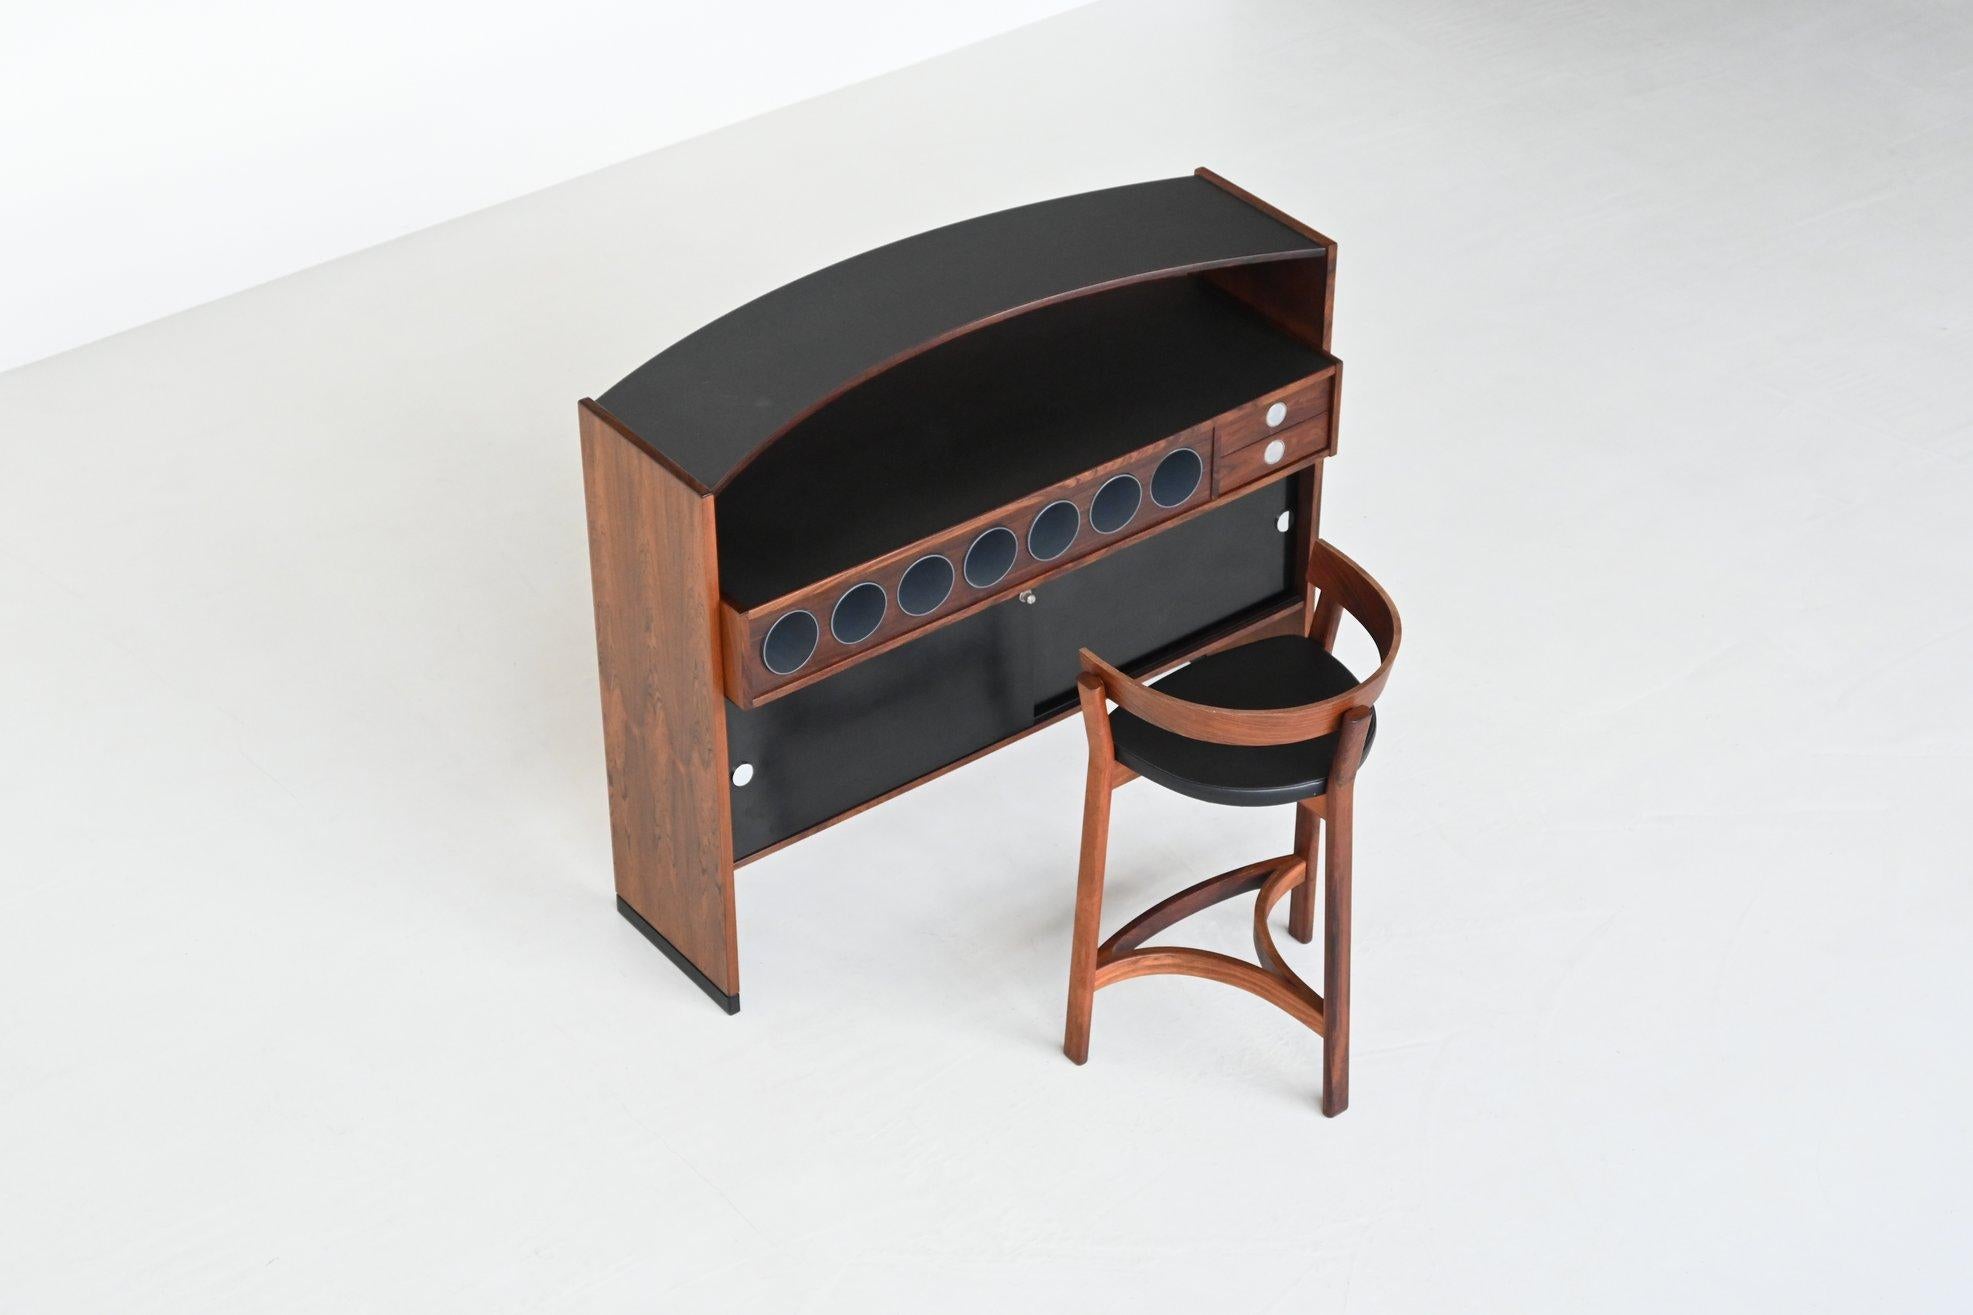 Highly refined freestanding dry bar cabinet with bar stool designed by Erik Buch for Dyrlund, Denmark 1960.

This decorative yet functional liquor bar is executed in beautiful grained rosewood. The bar is boomerang shaped with a chromed steel